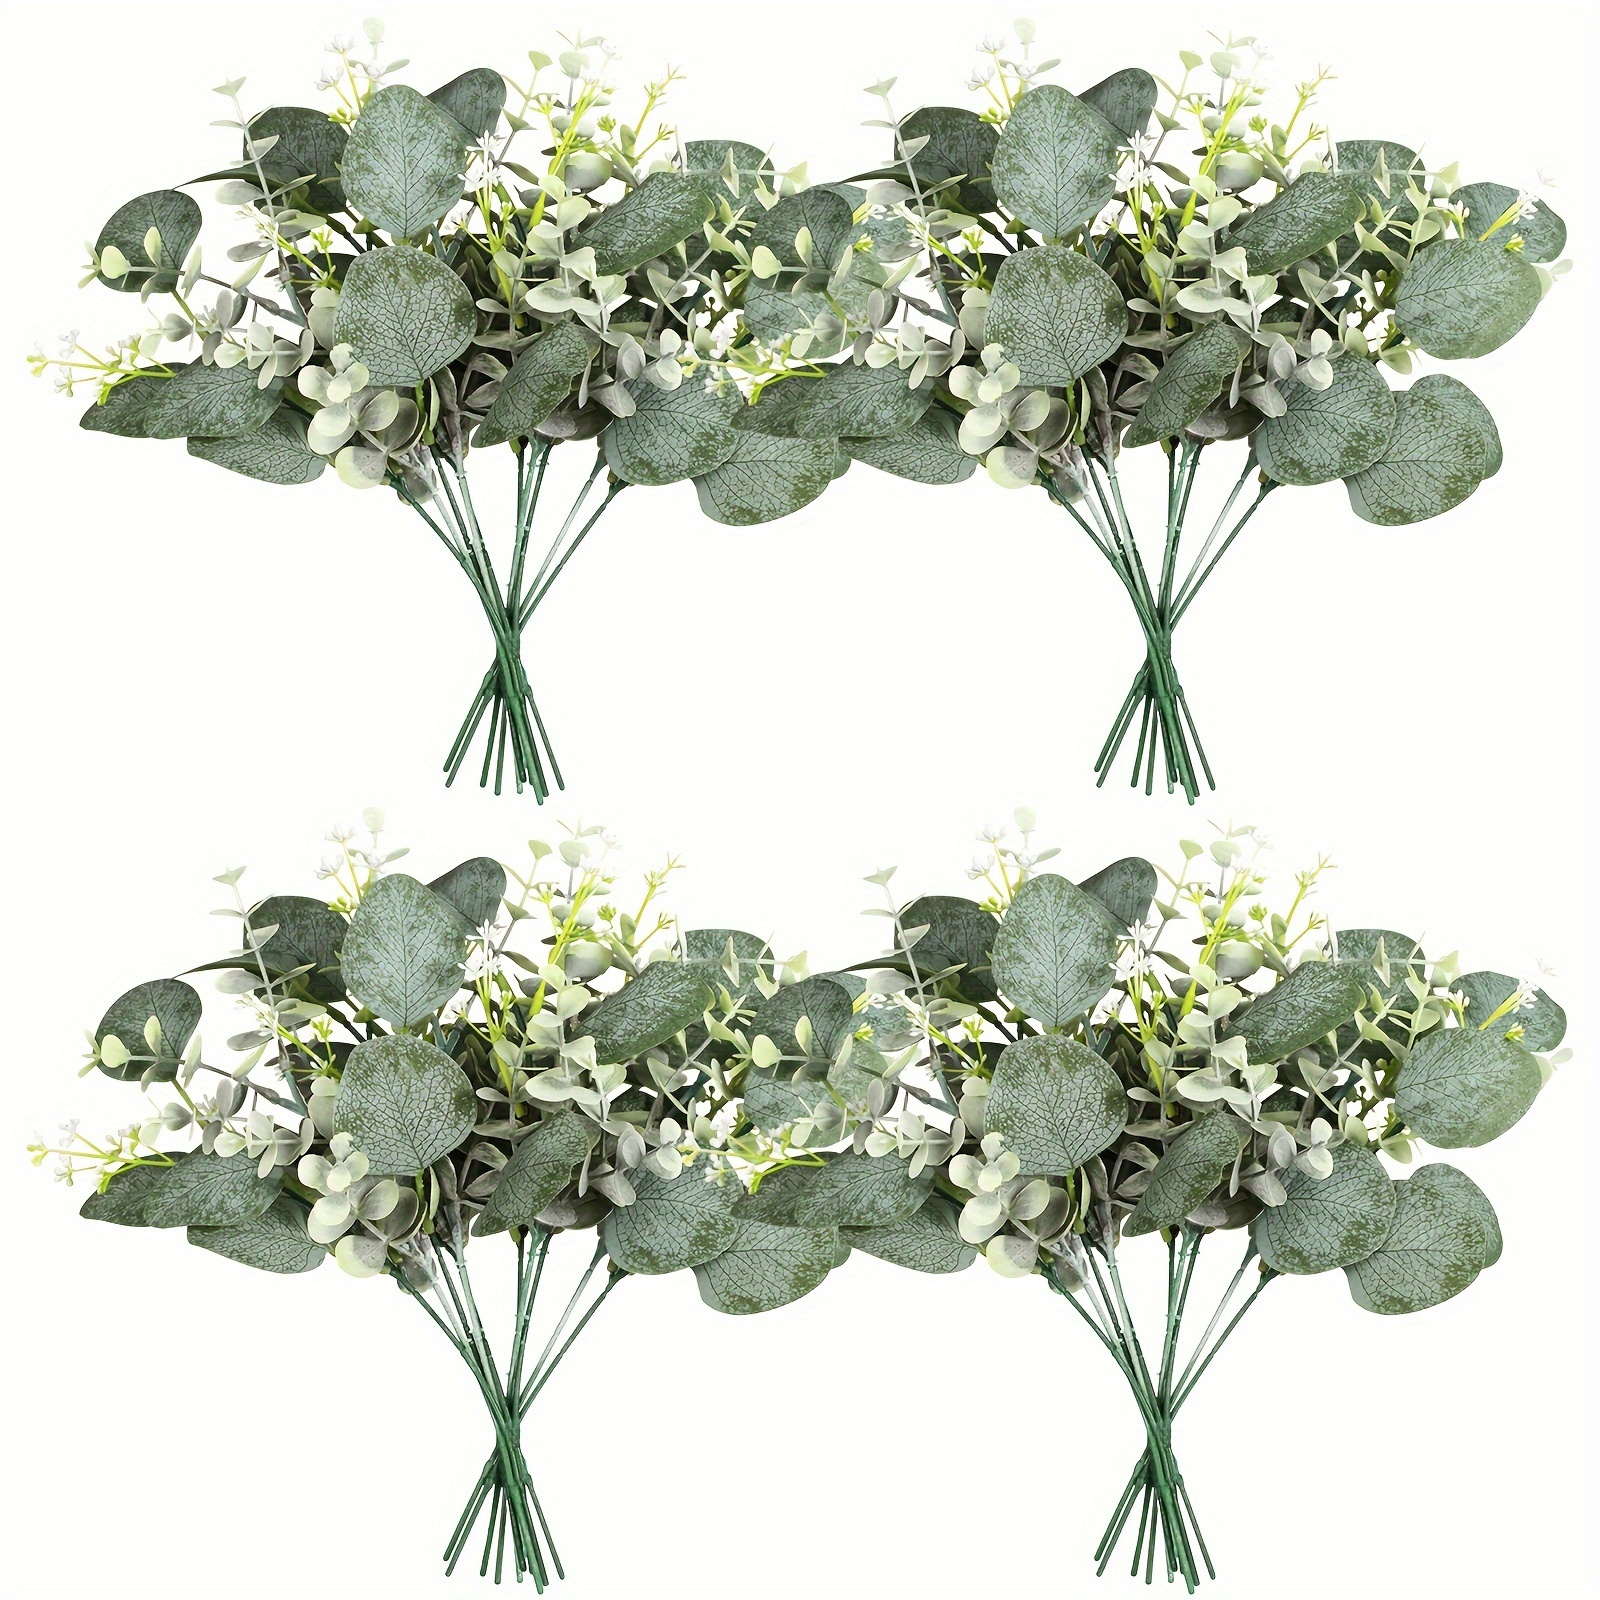 

20pcs Mixed Eucalyptus Leaves Stems, Bulk Artificial Oval Eucalyptus Leaves With White Seeds Stems And Eucalyptus Leaves Sprays, For Vase Floral Wreath Bouquets Wedding Greenery Decoration